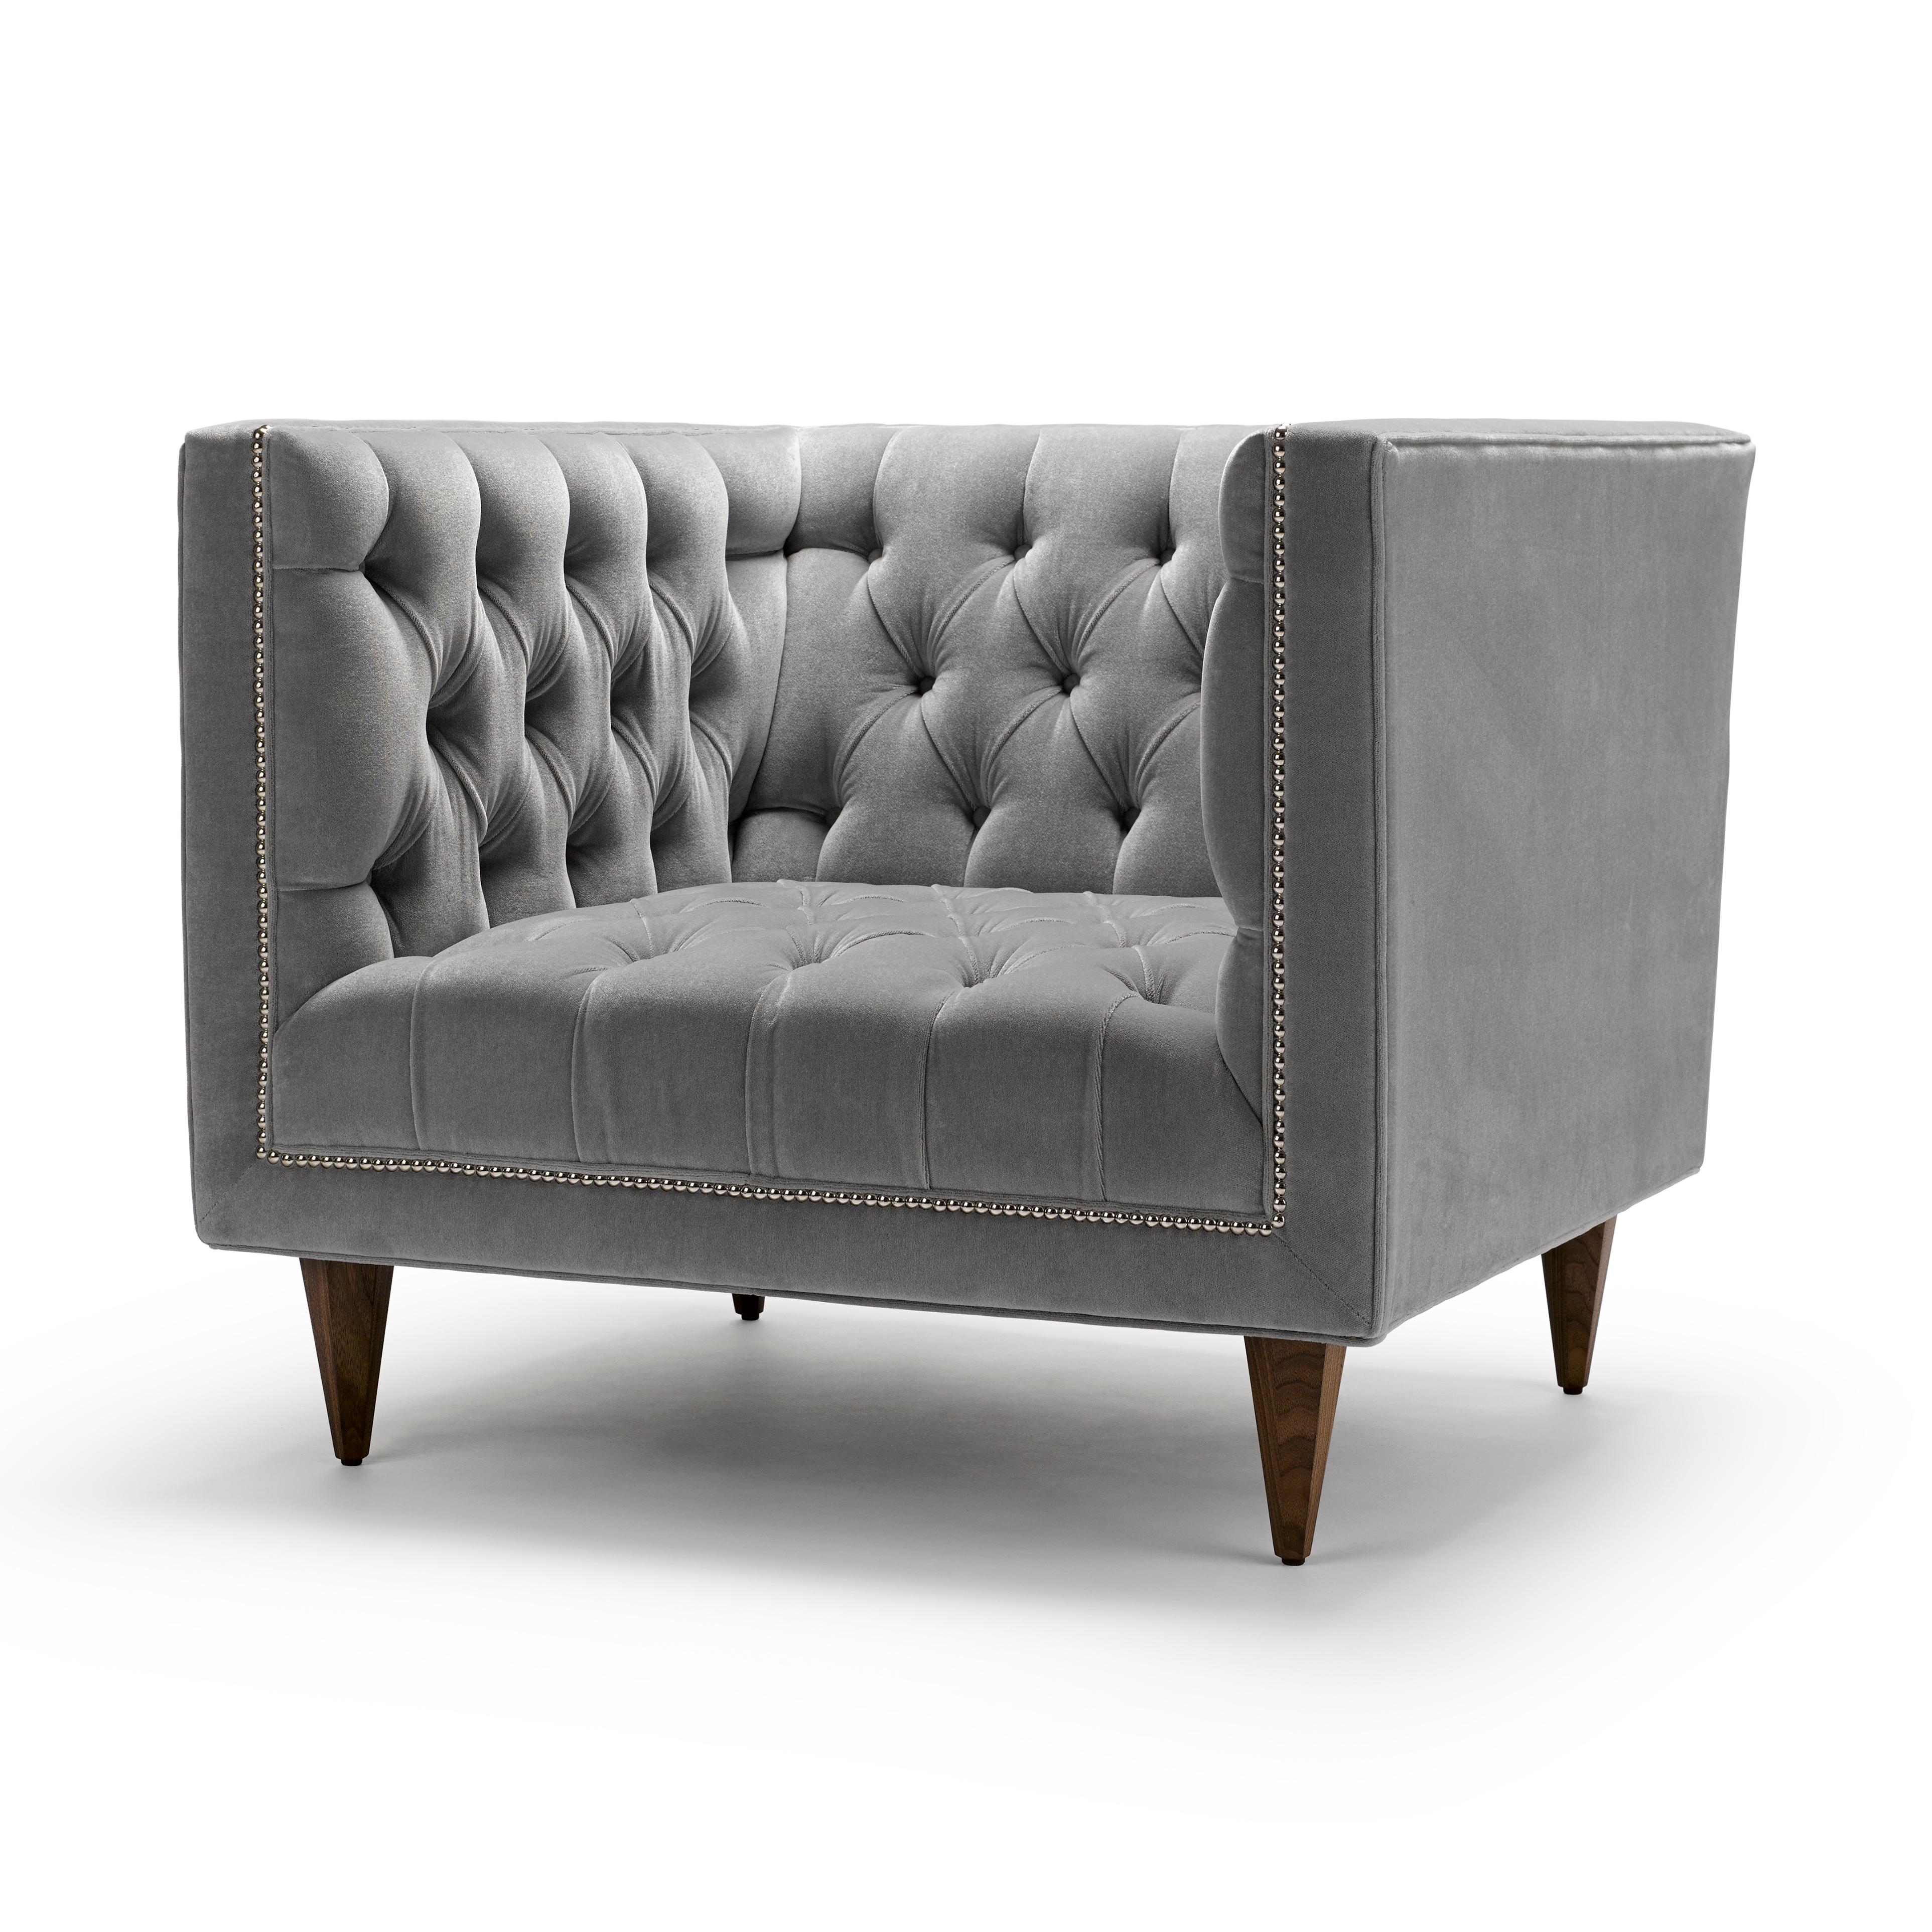 The Tux Chair is our contemporary interpretation of the Classic Chesterfield. The deep buttoning and tailored detailing make this piece a personal favourite. Shown here upholstered in Fox Linton Mohair Velvet, with legs in natural oiled walnut and